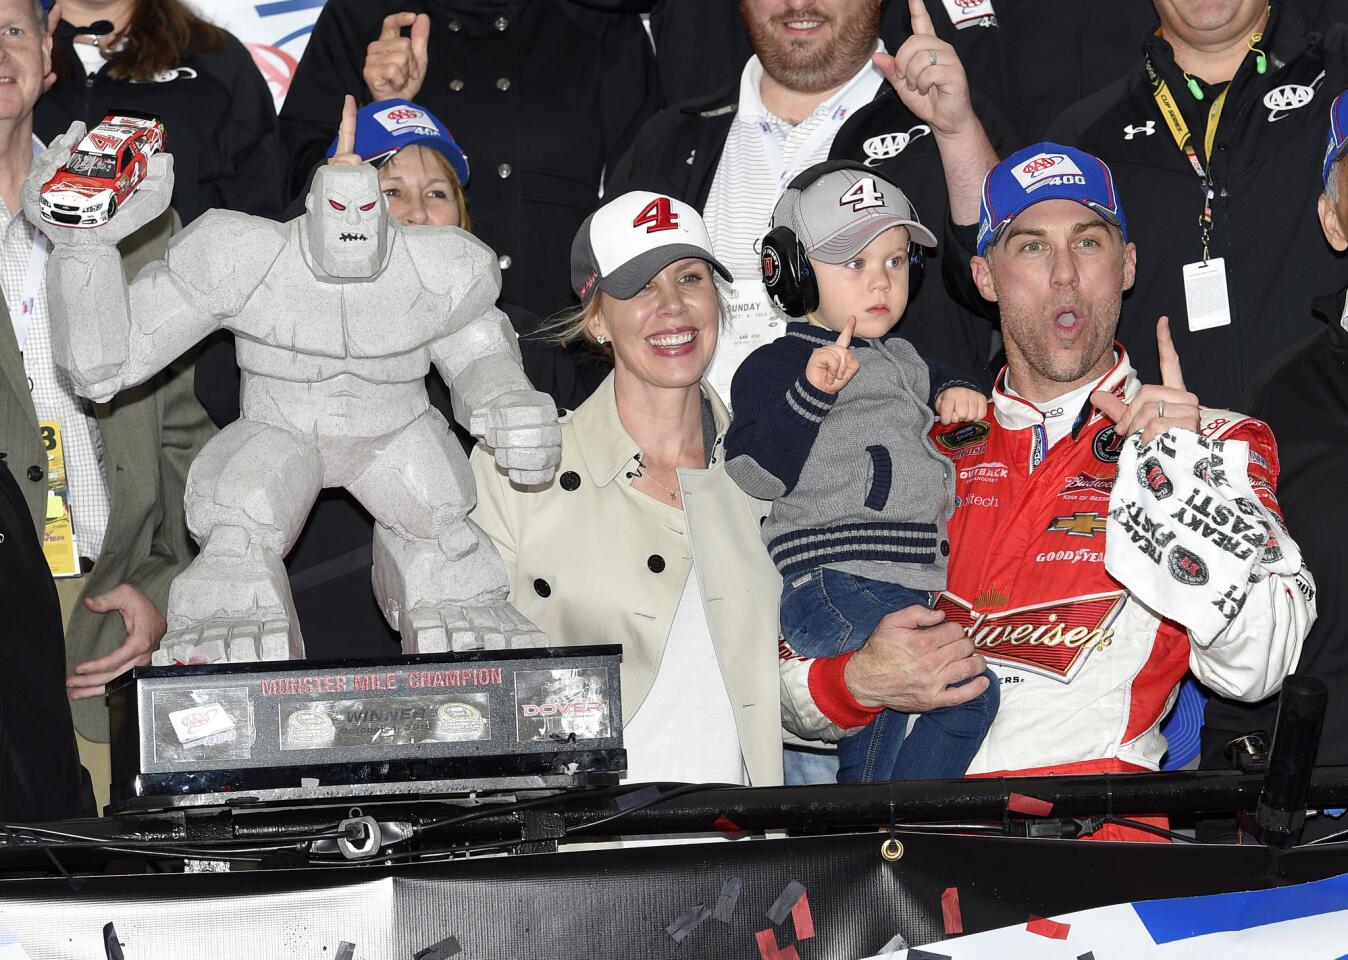 Dover Chase race 3: Kevin Harvick